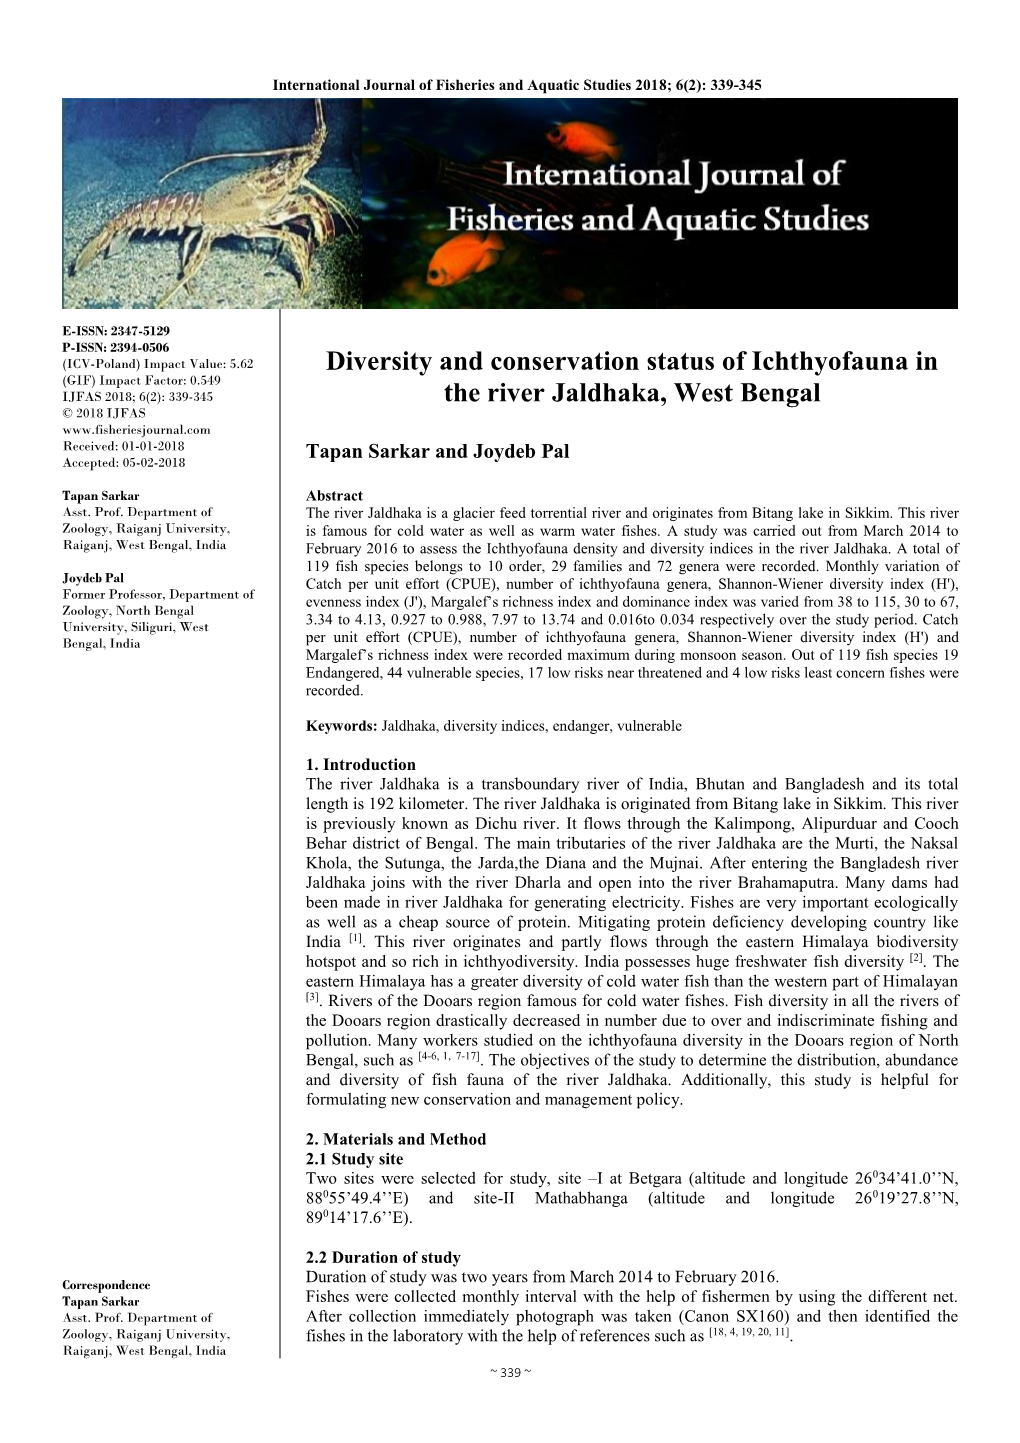 Diversity and Conservation Status of Ichthyofauna in the River Jaldhaka